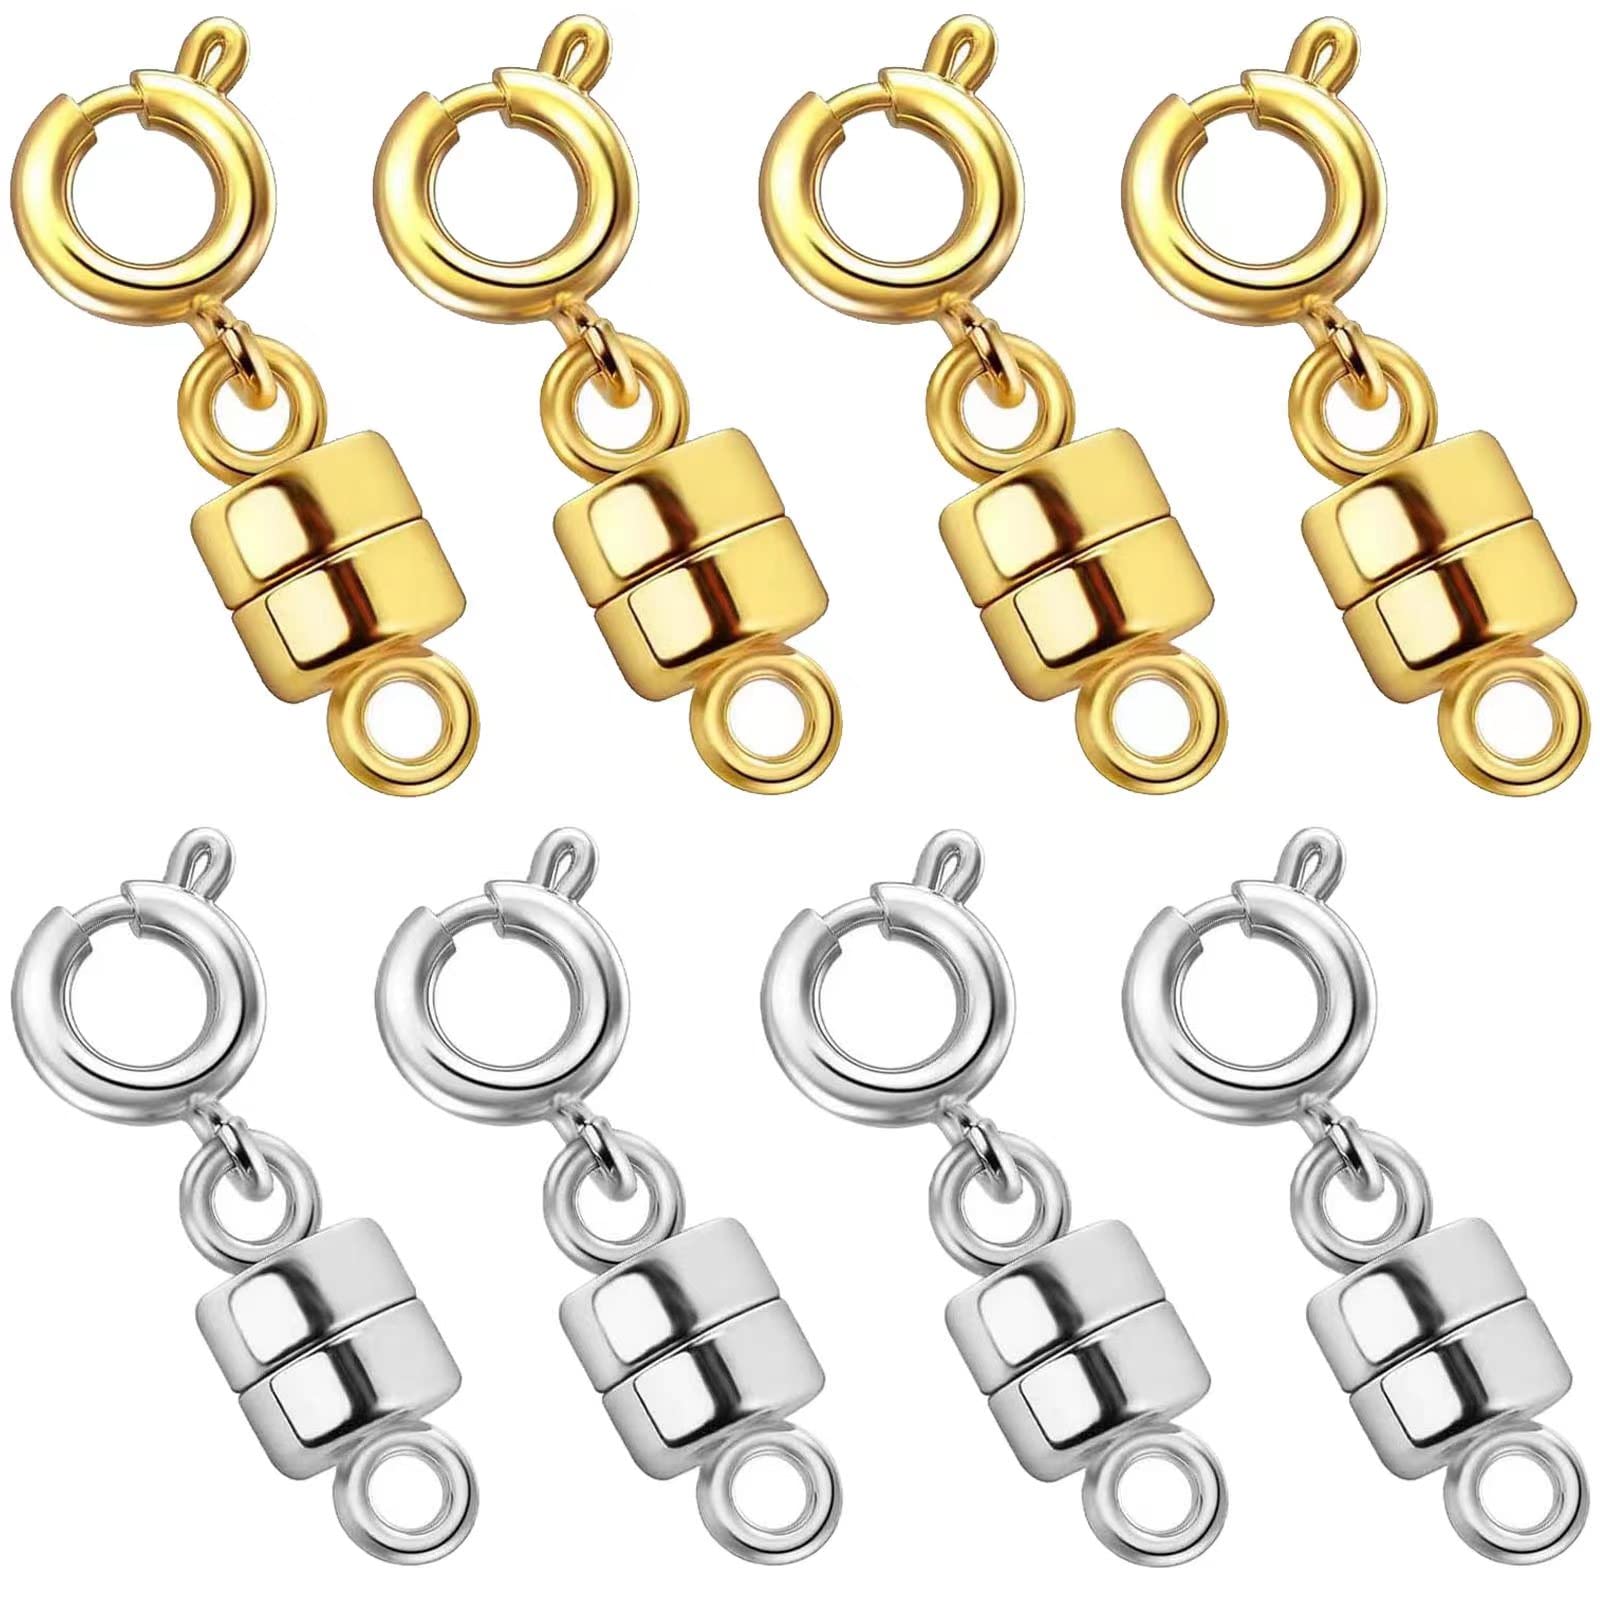 OHINGLT Necklace Clasps and Closures,Converters Jewelry Clasps for Bracelet  Necklaces Chain,Gold and Silver Plated